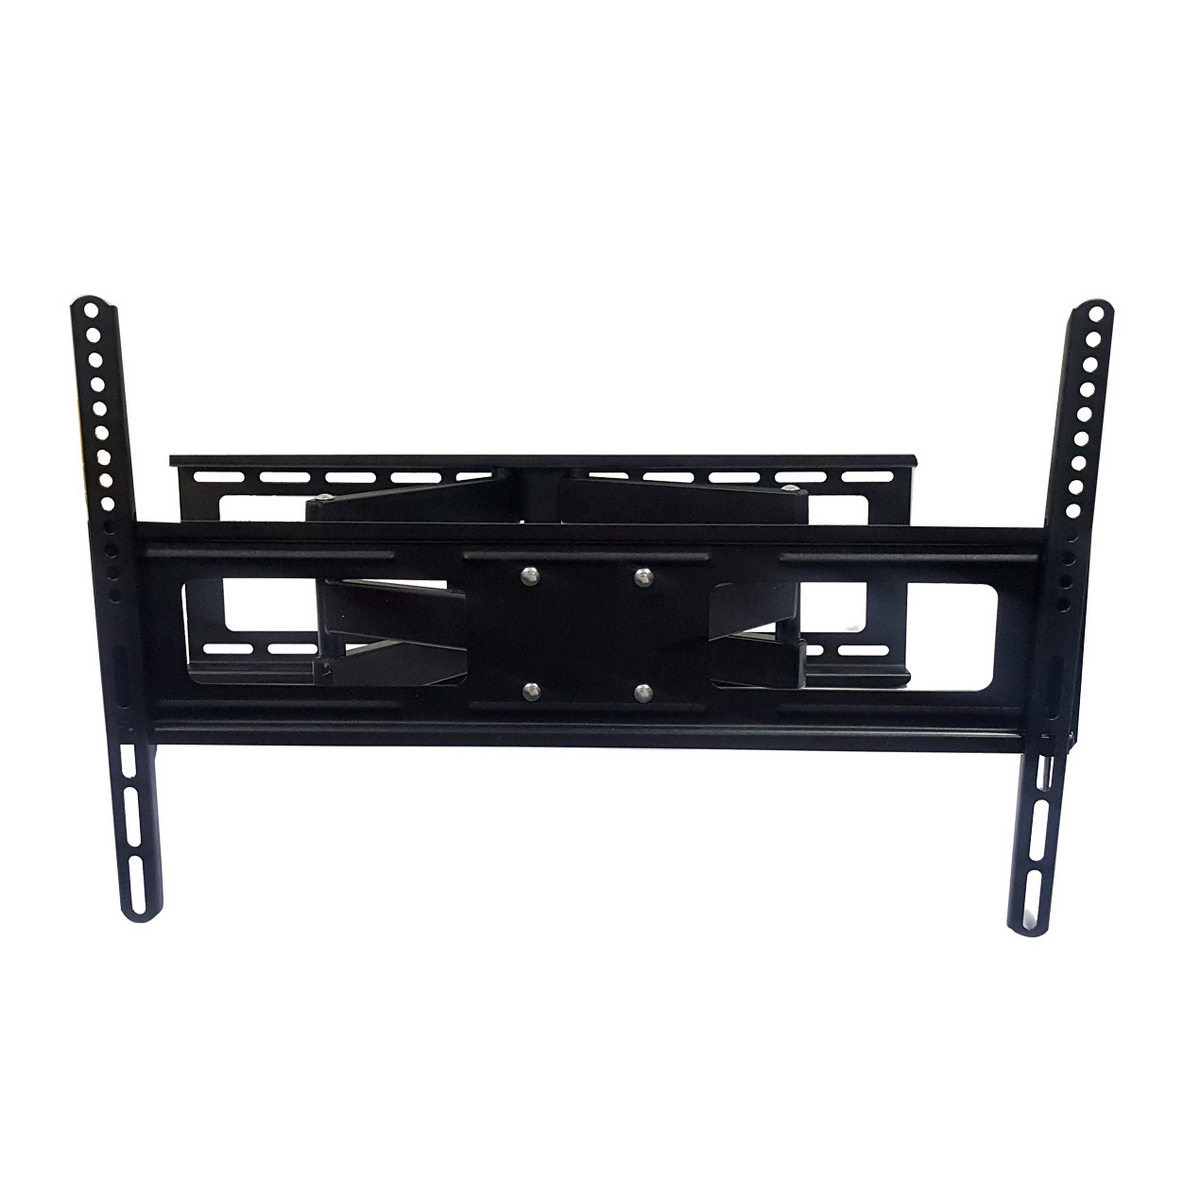 M MOUNT TV Wall Mount 40" - 70" MMOUNT-88A